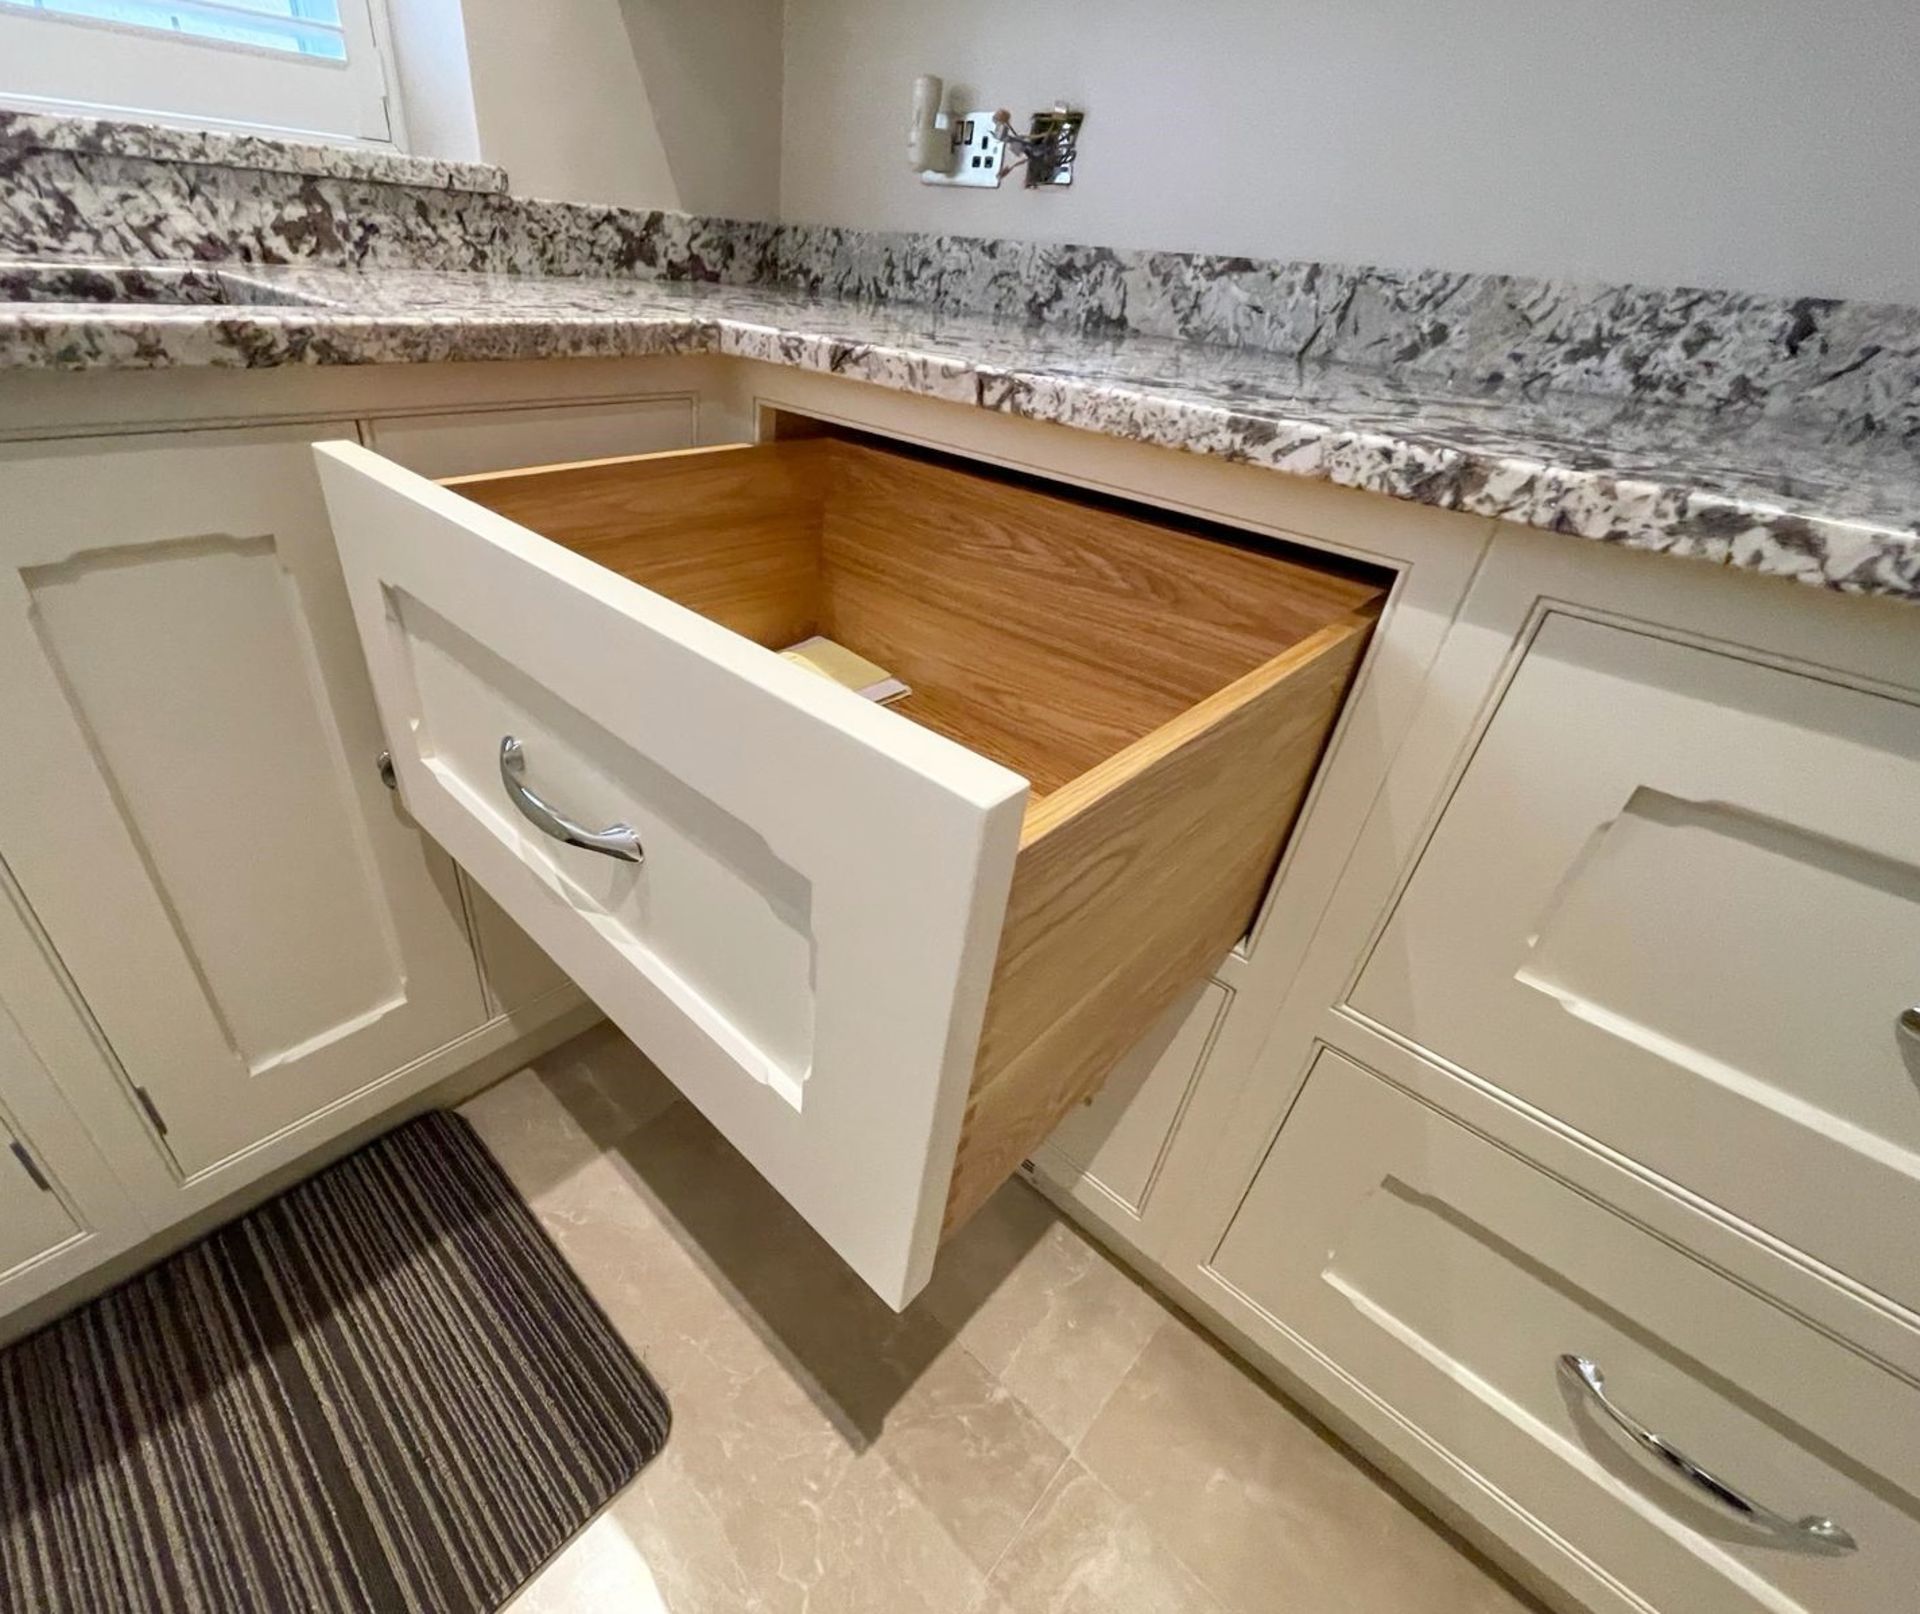 1 x Bespoke Fitted Solid Wood Kitchen with Natural Bianco Antico Grantite Work Surfaces - Image 36 of 61